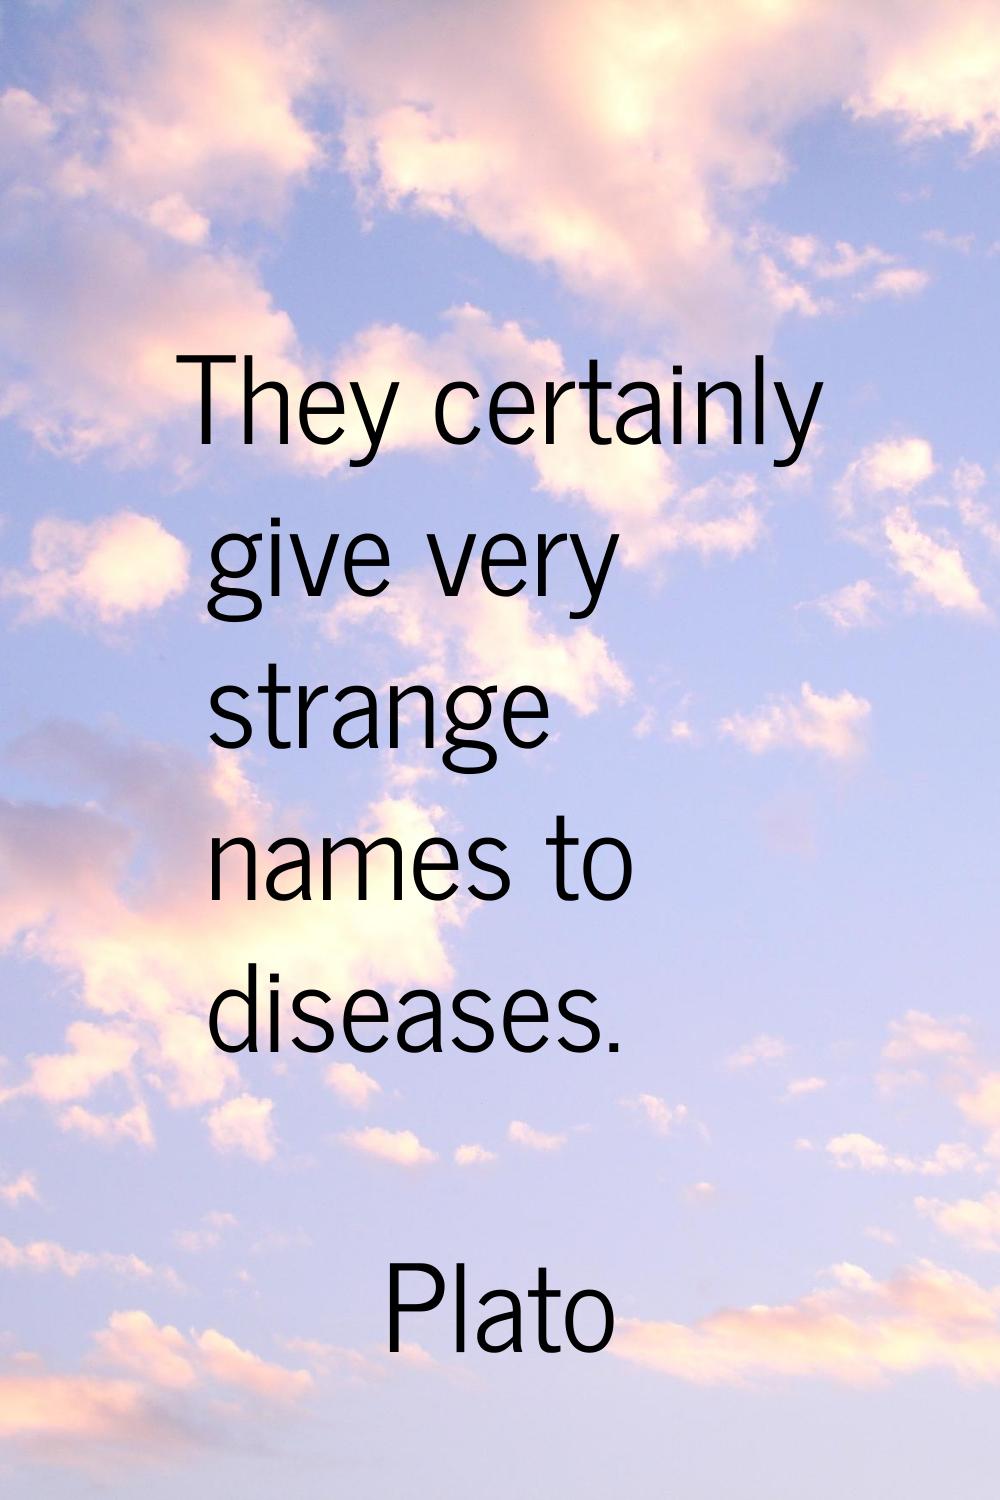 They certainly give very strange names to diseases.